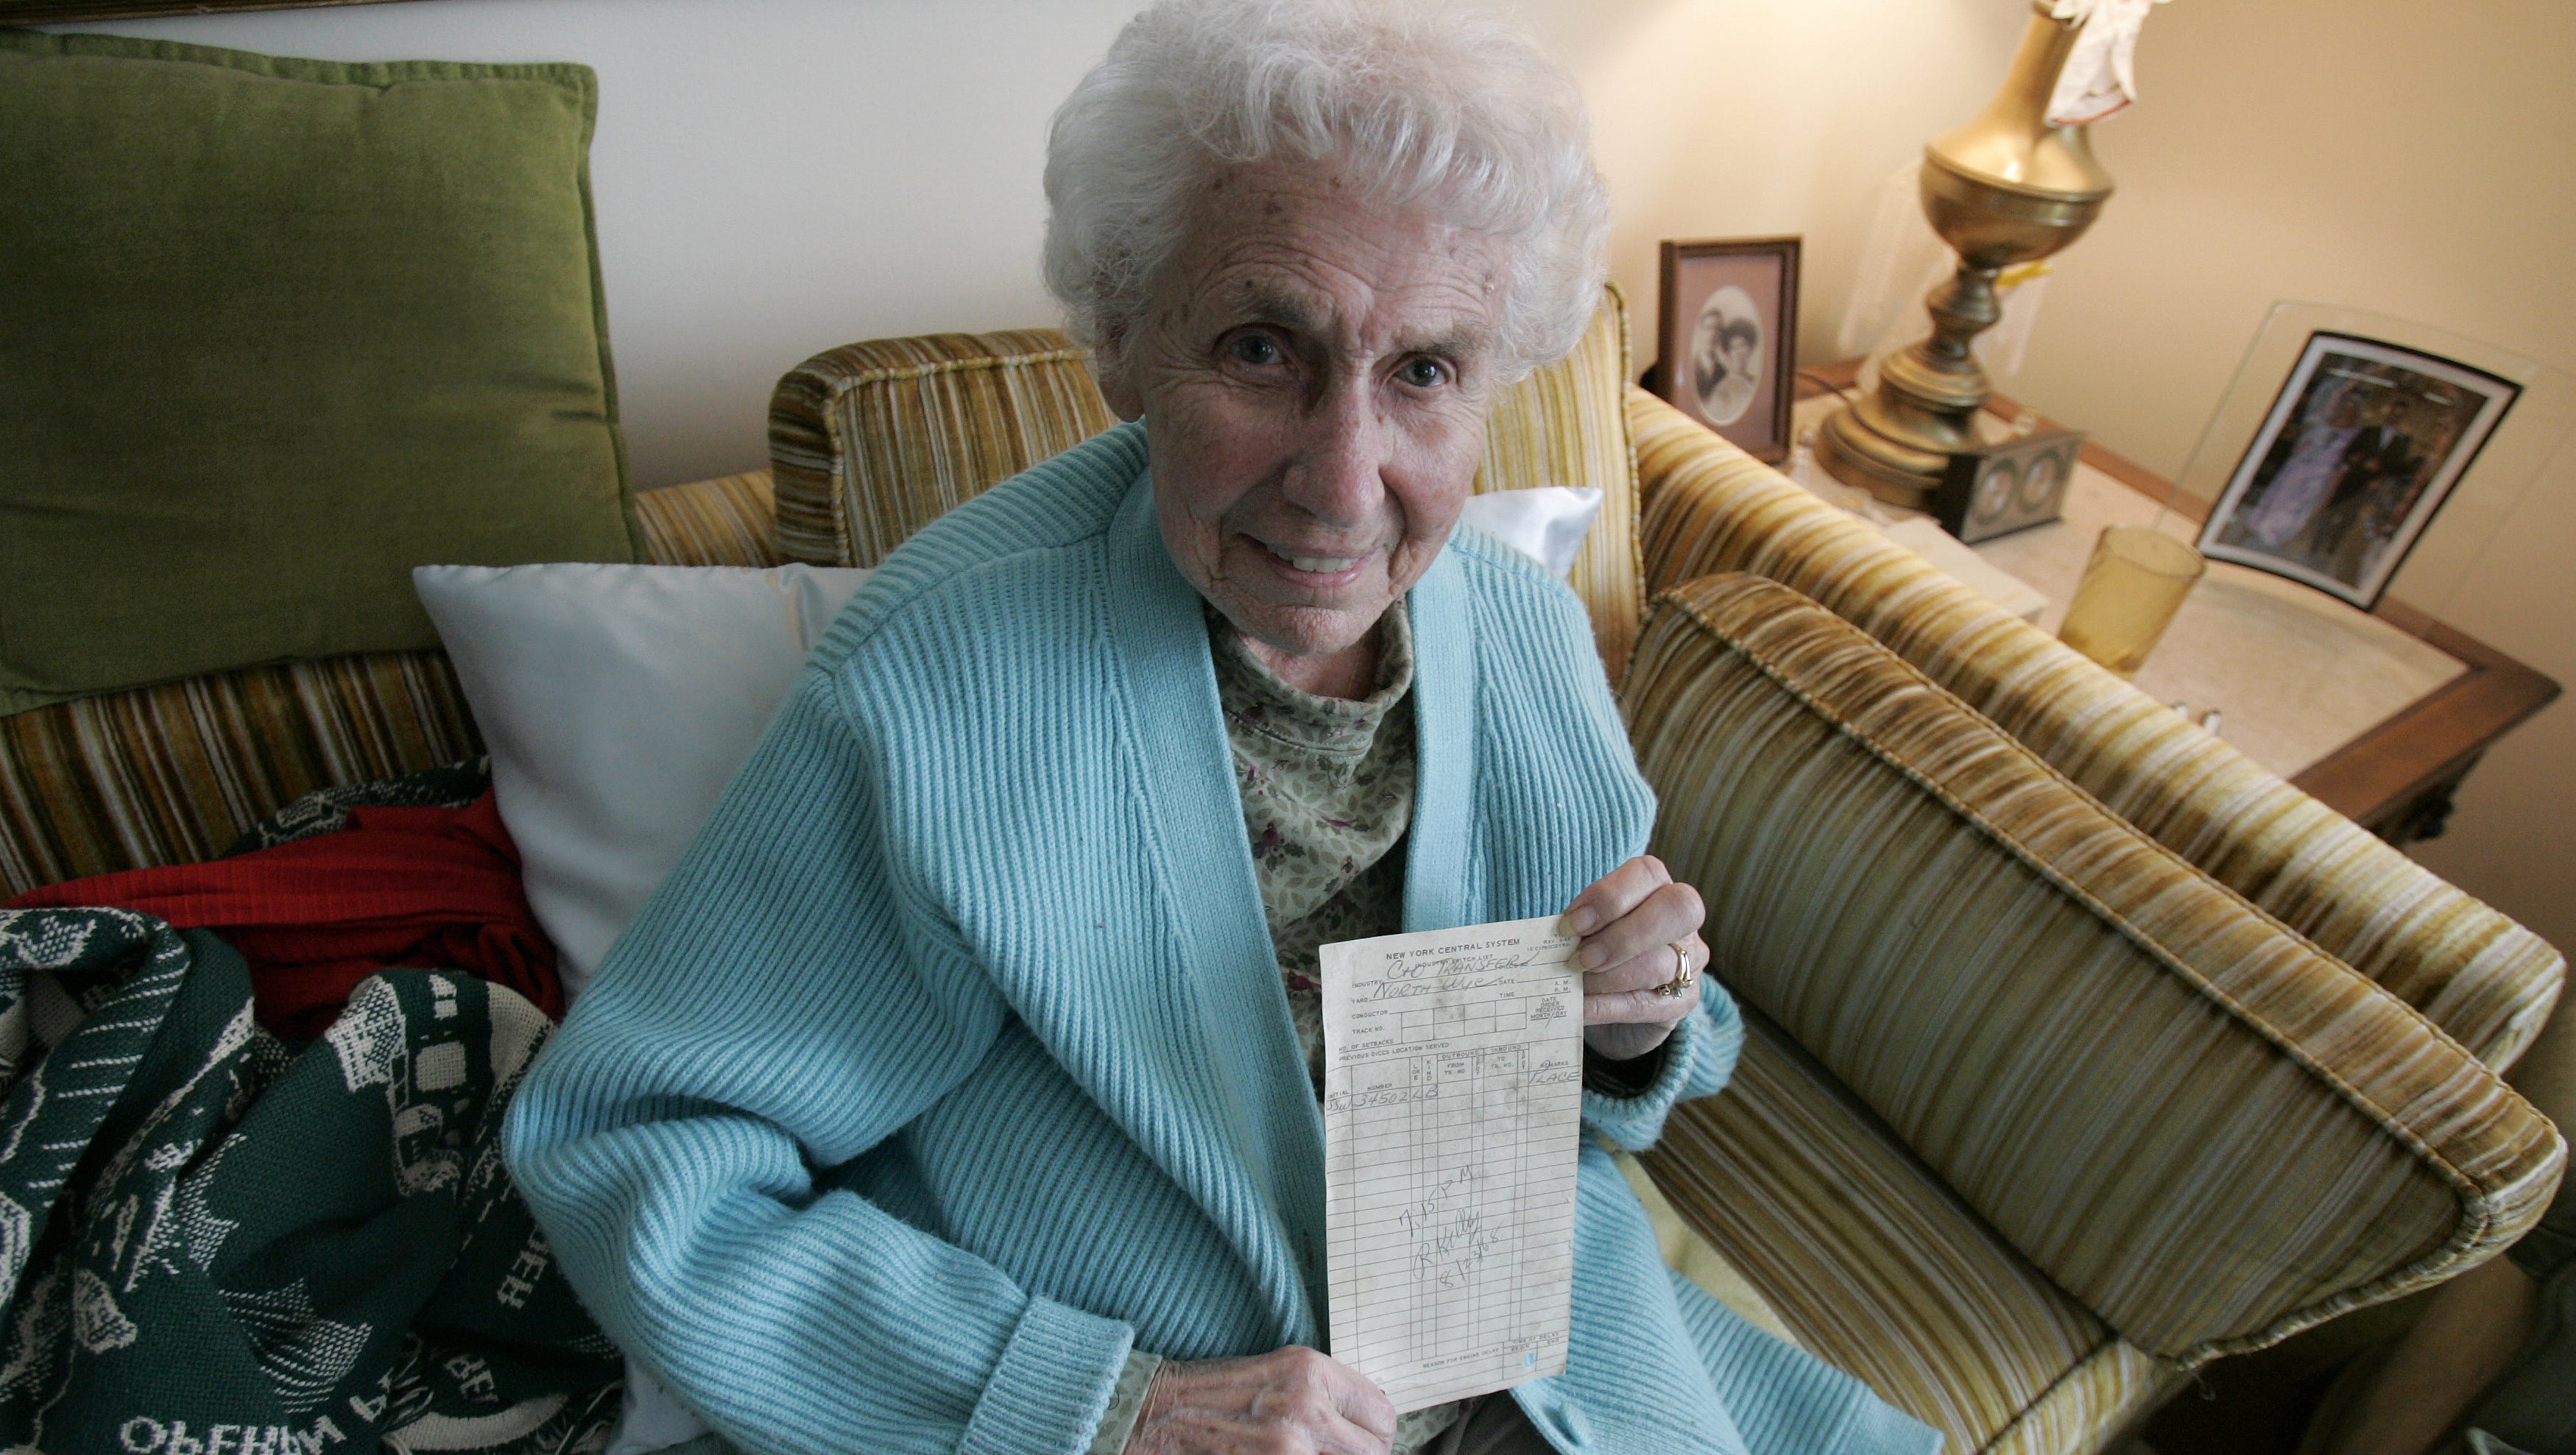 Dorthea Kelley, 88, wife of Robert Kelley, holds the scrap of paper found by Detroit News reporter Charlie LeDuff, March 25, 2008, at her home in Charlevoix. The paper has her husband's signature.